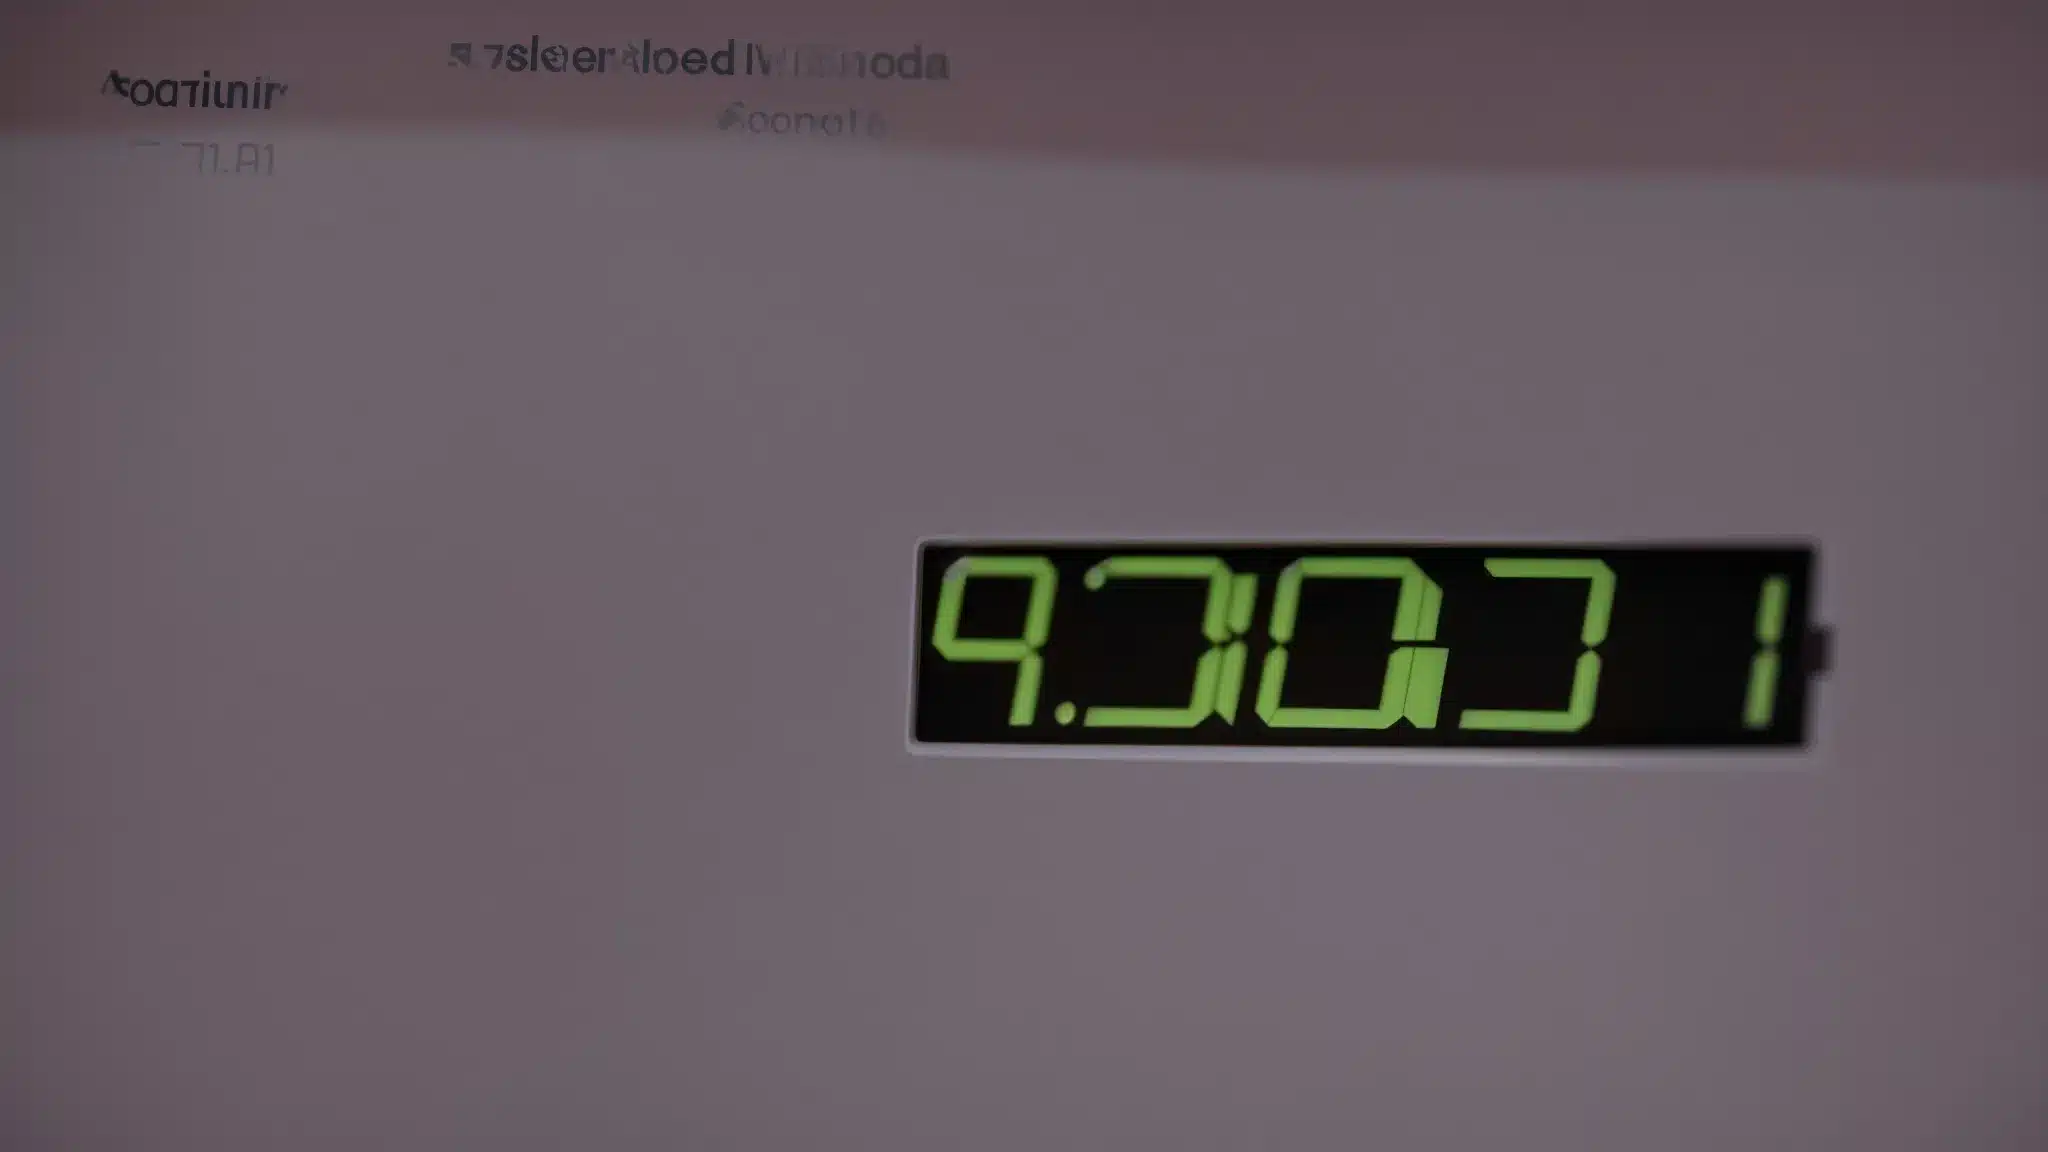 A Computer Screen Displaying A Loading Bar On A Wordpress Dashboard With A Clock Running In The Background.